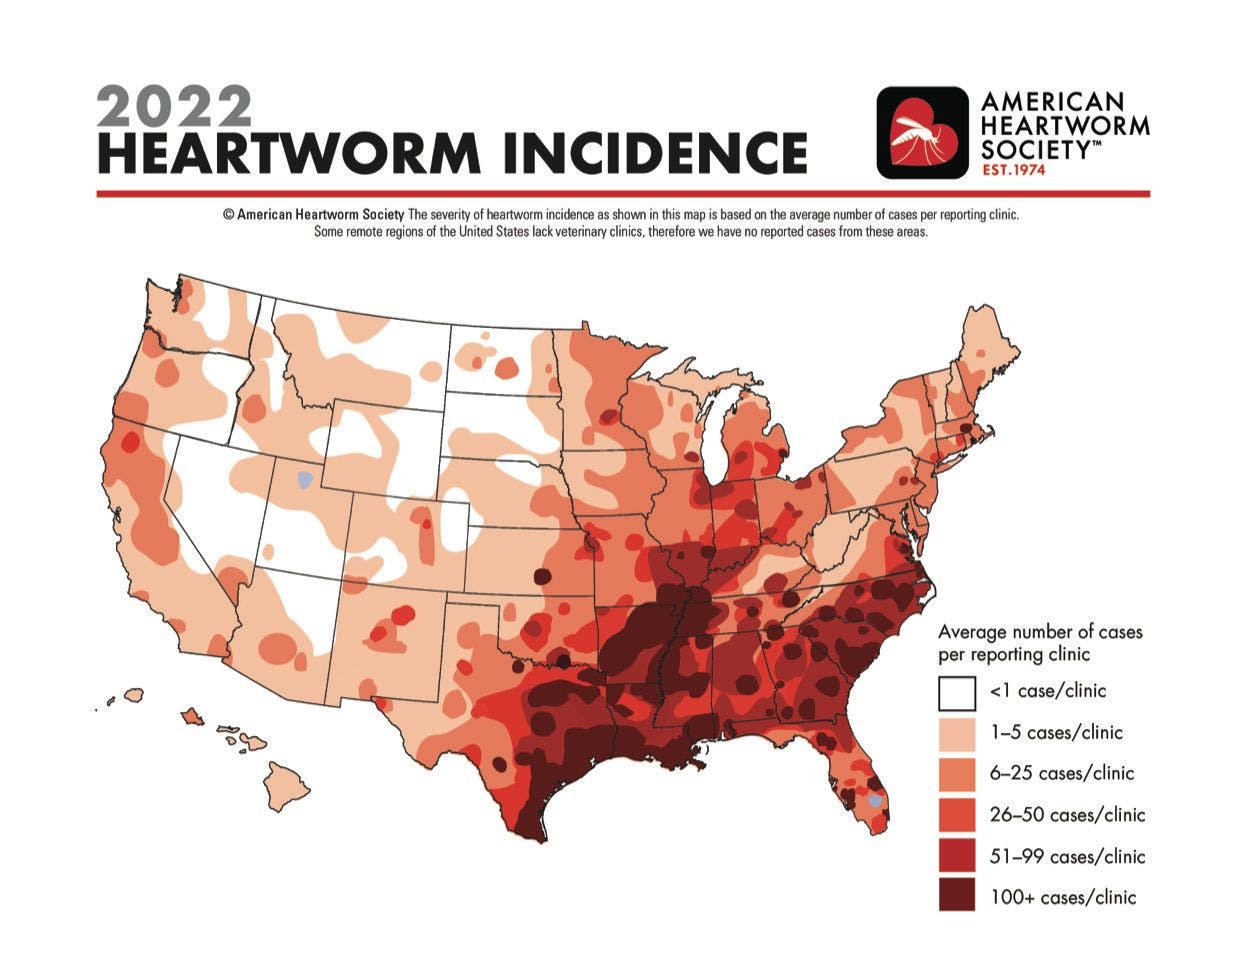 Image courtesy of the American Heartworm Society.